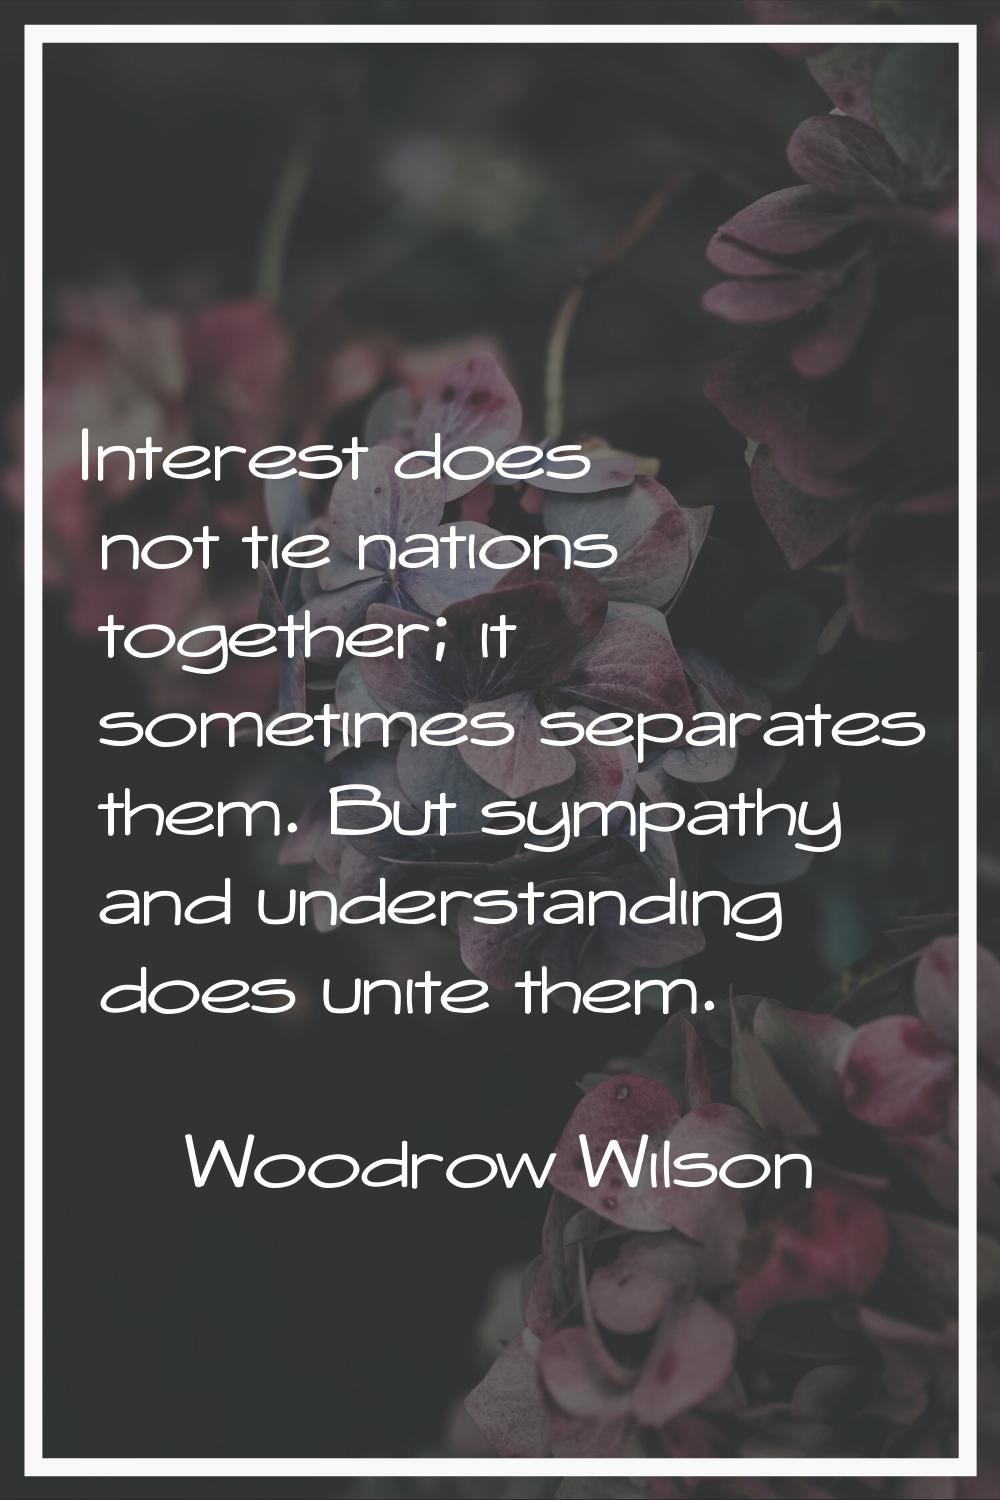 Interest does not tie nations together; it sometimes separates them. But sympathy and understanding